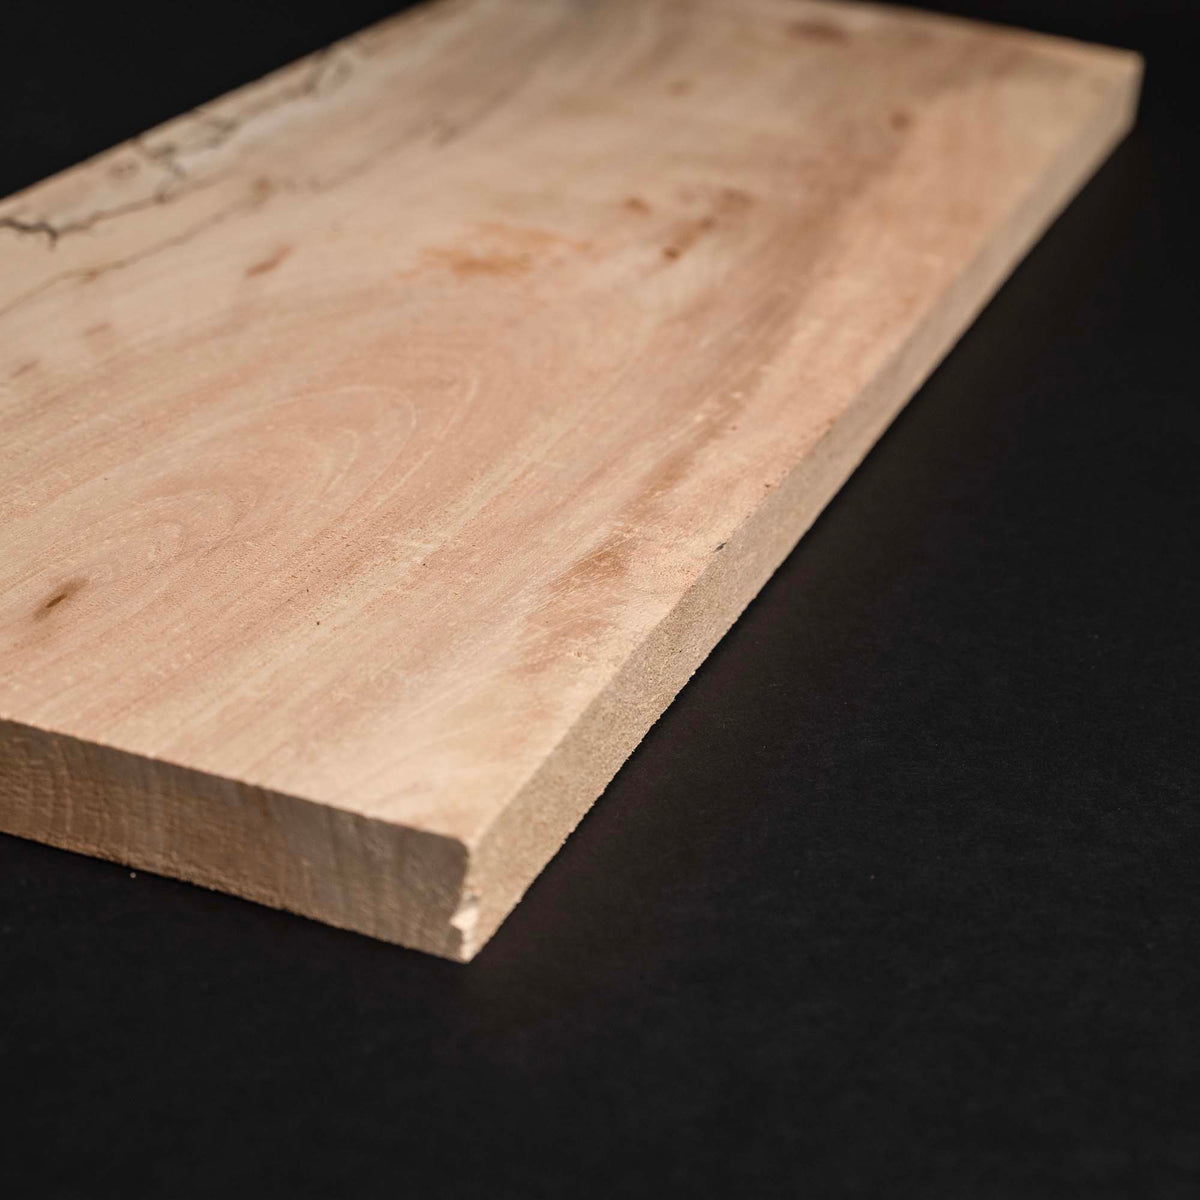 4/4 1” Spalted Wide Hard Maple Wood Boards - Kiln Dried - Dimensional Lumber - Cut To Size Boards - Perfect for Floating shelf shelves